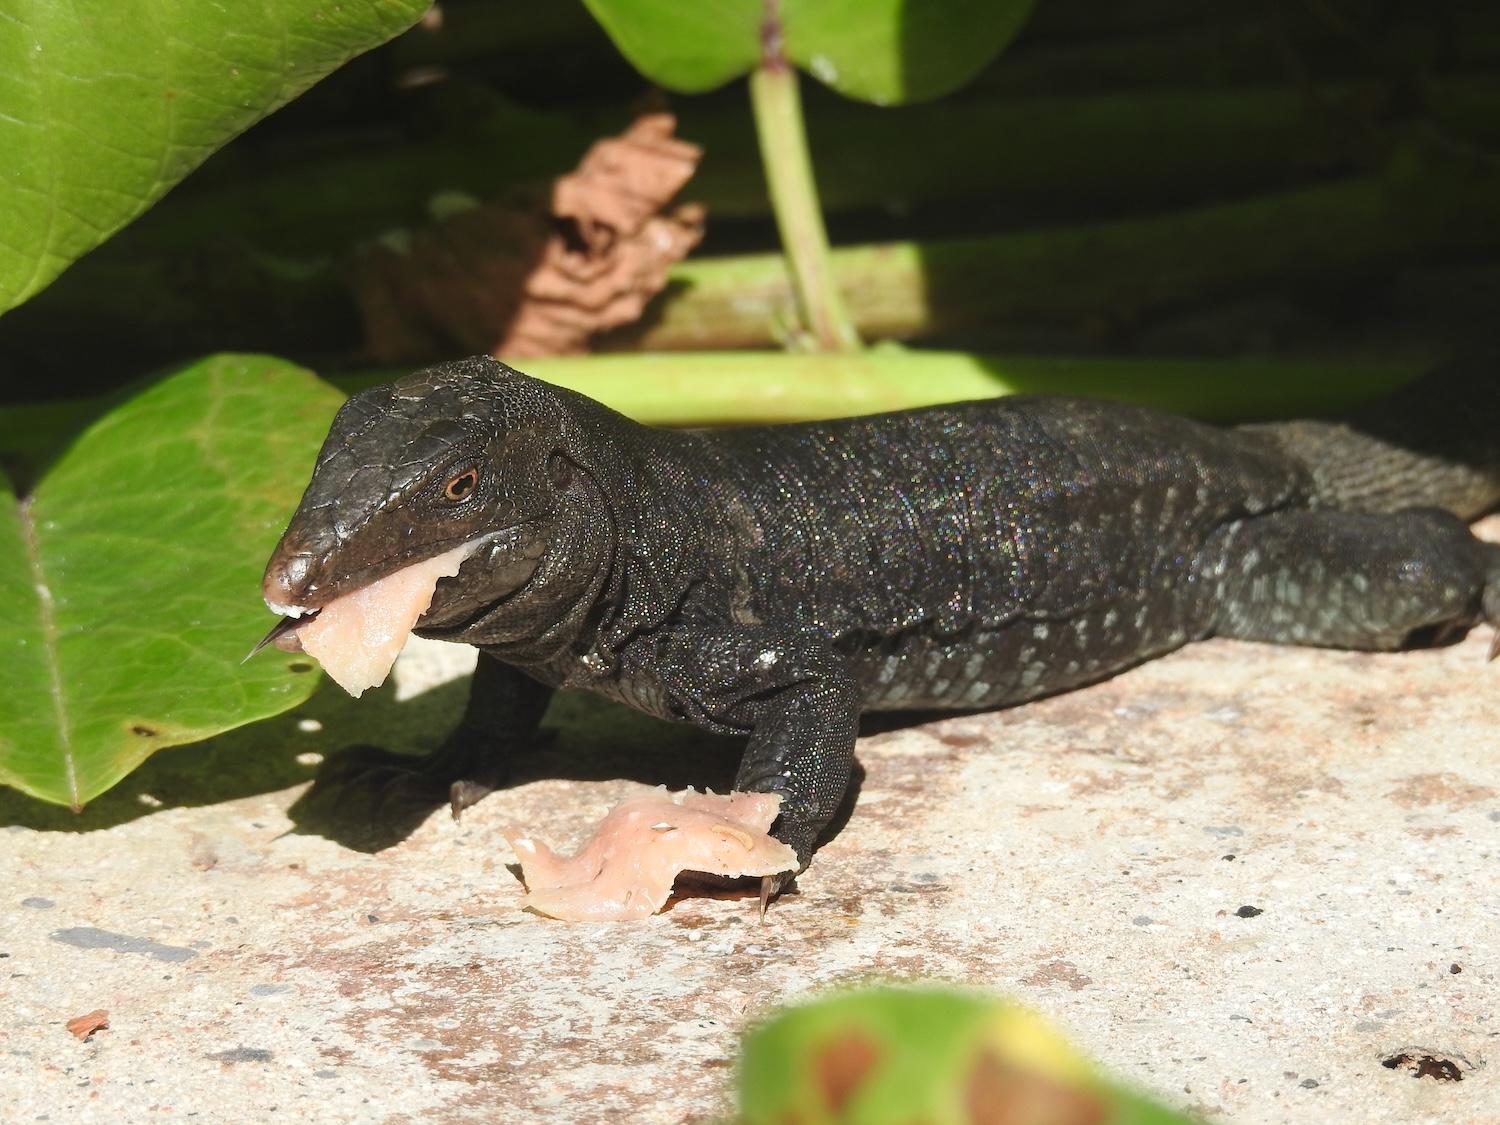 The Sombrero Ground Lizard can only be found on Sombrero Island, an offshore cay that belongs to Anguilla.